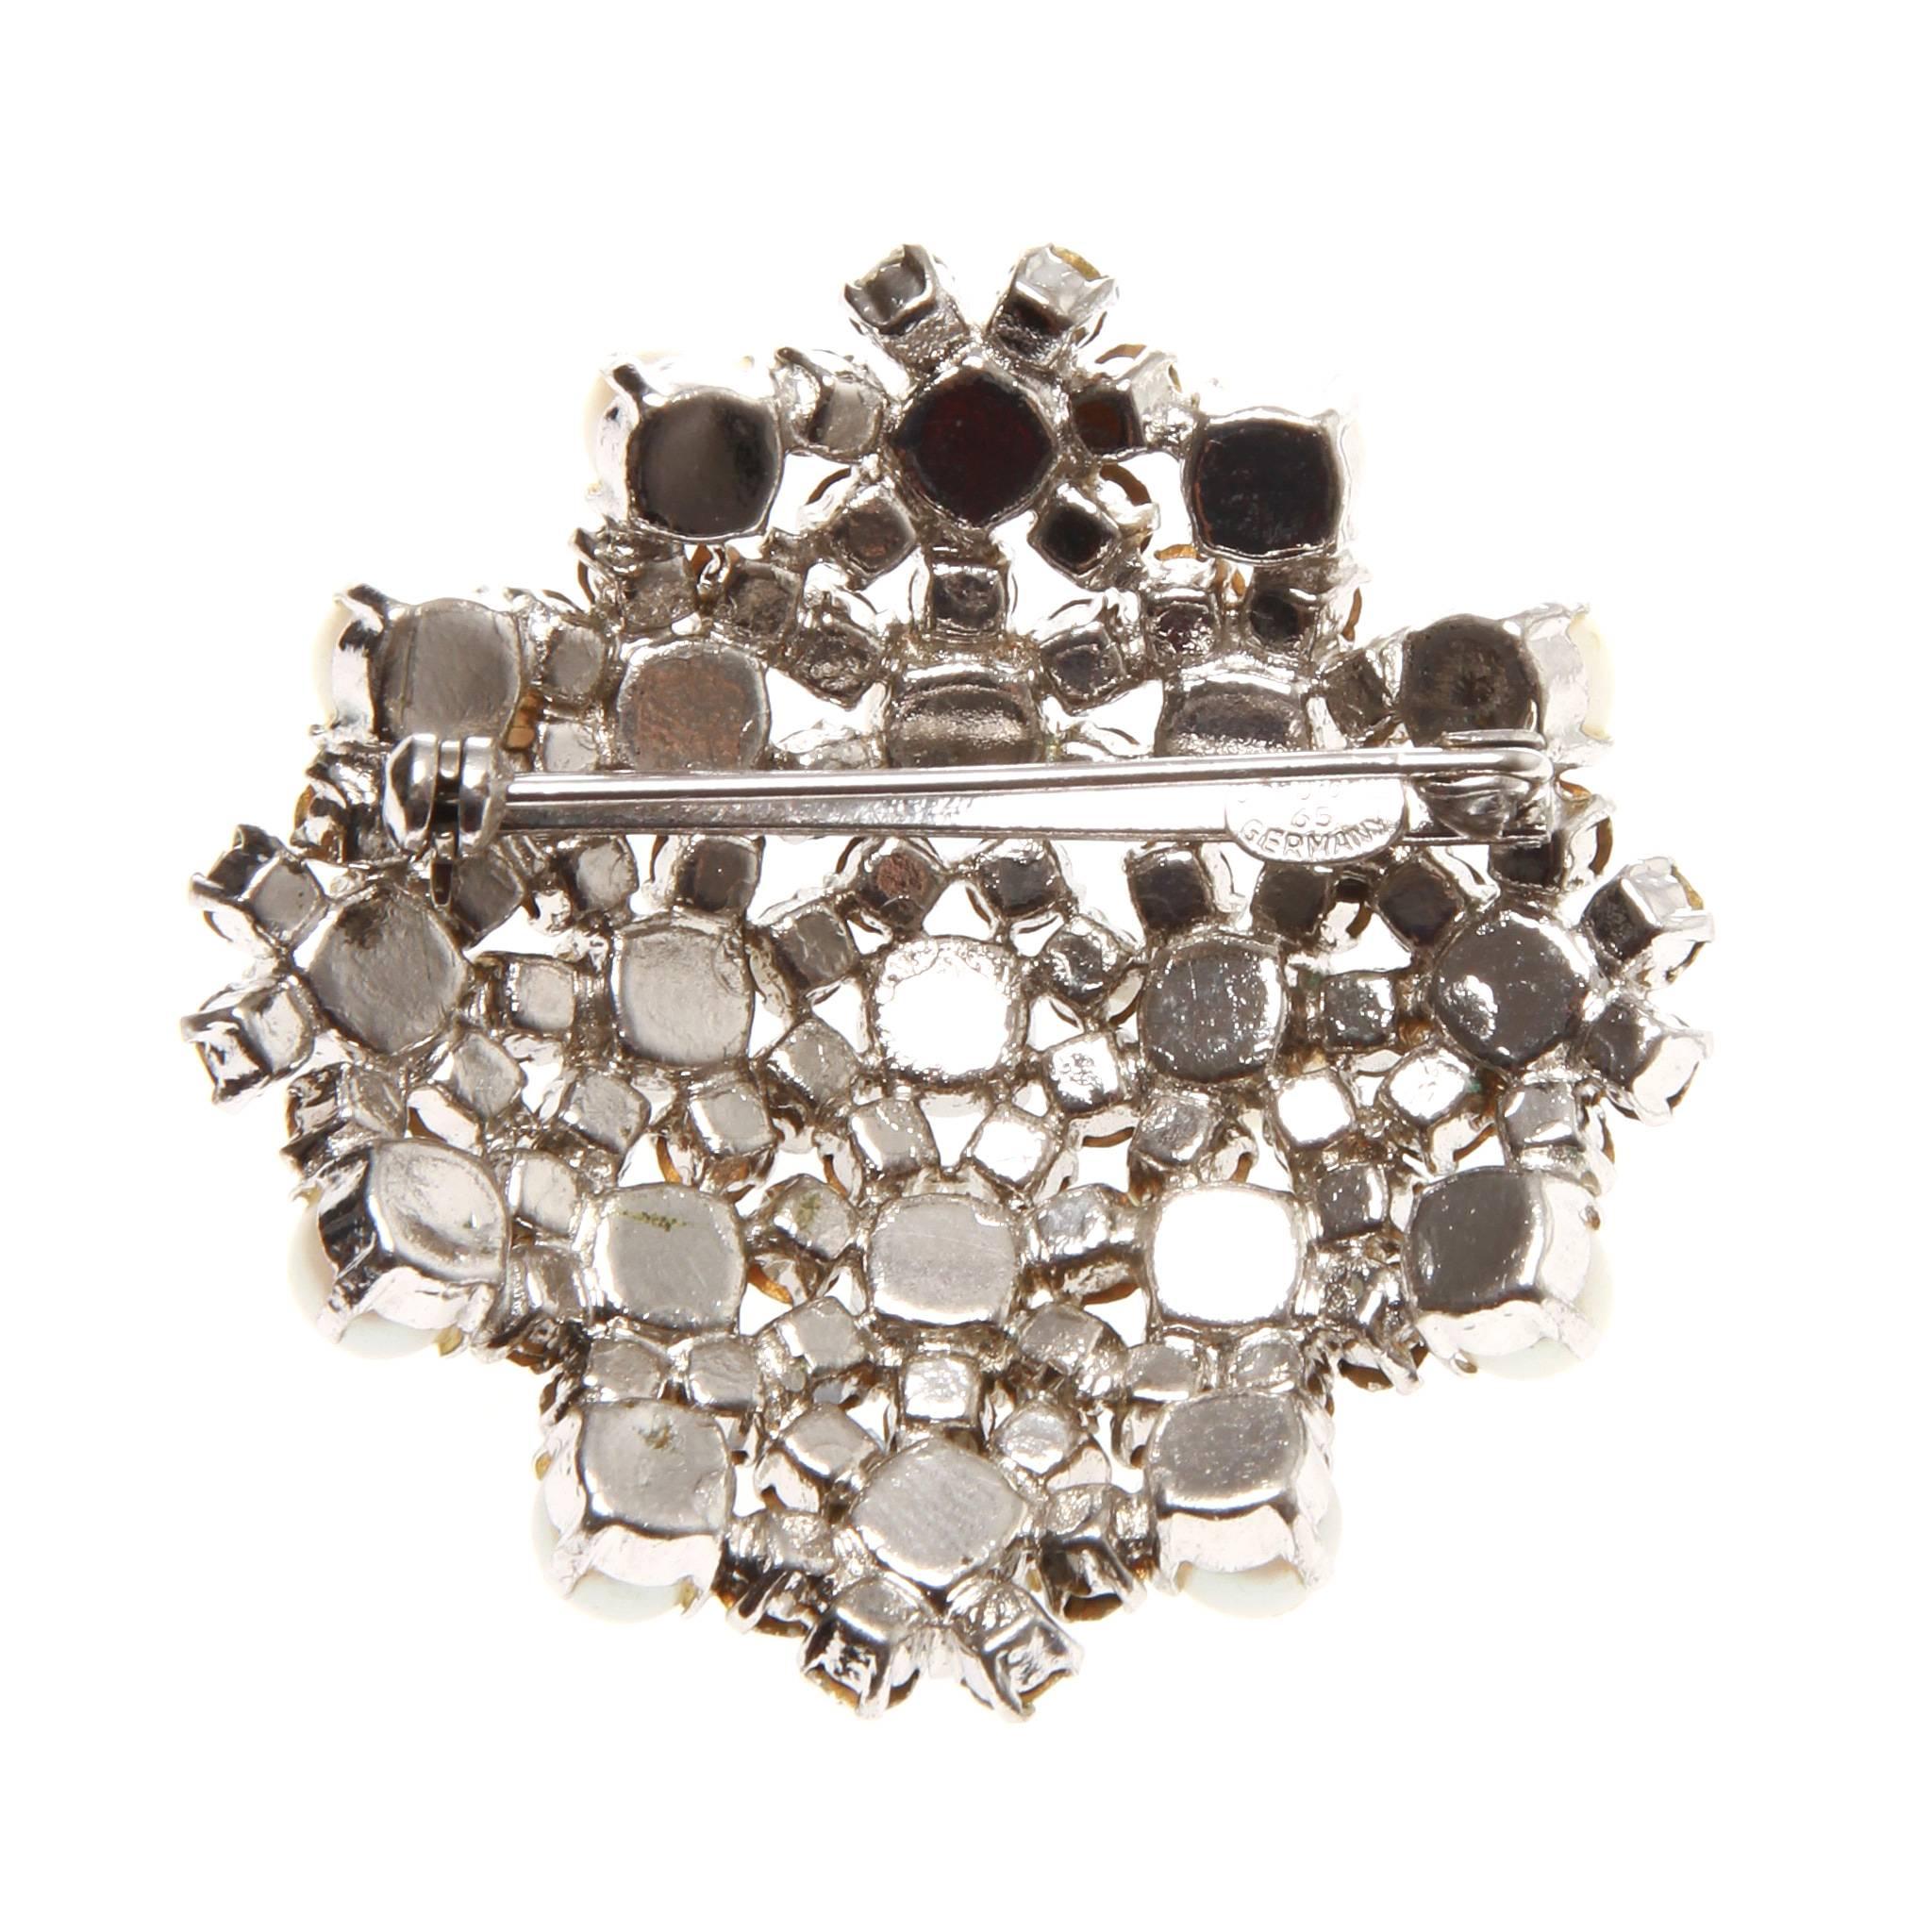 Christian Dior brooch featuring a cluster of clear Swarovski crystals and pearls in a silver setting. 

Branded stamp at back. Engraved Chr.Dior 65 Germany

Fastening: Roll needle